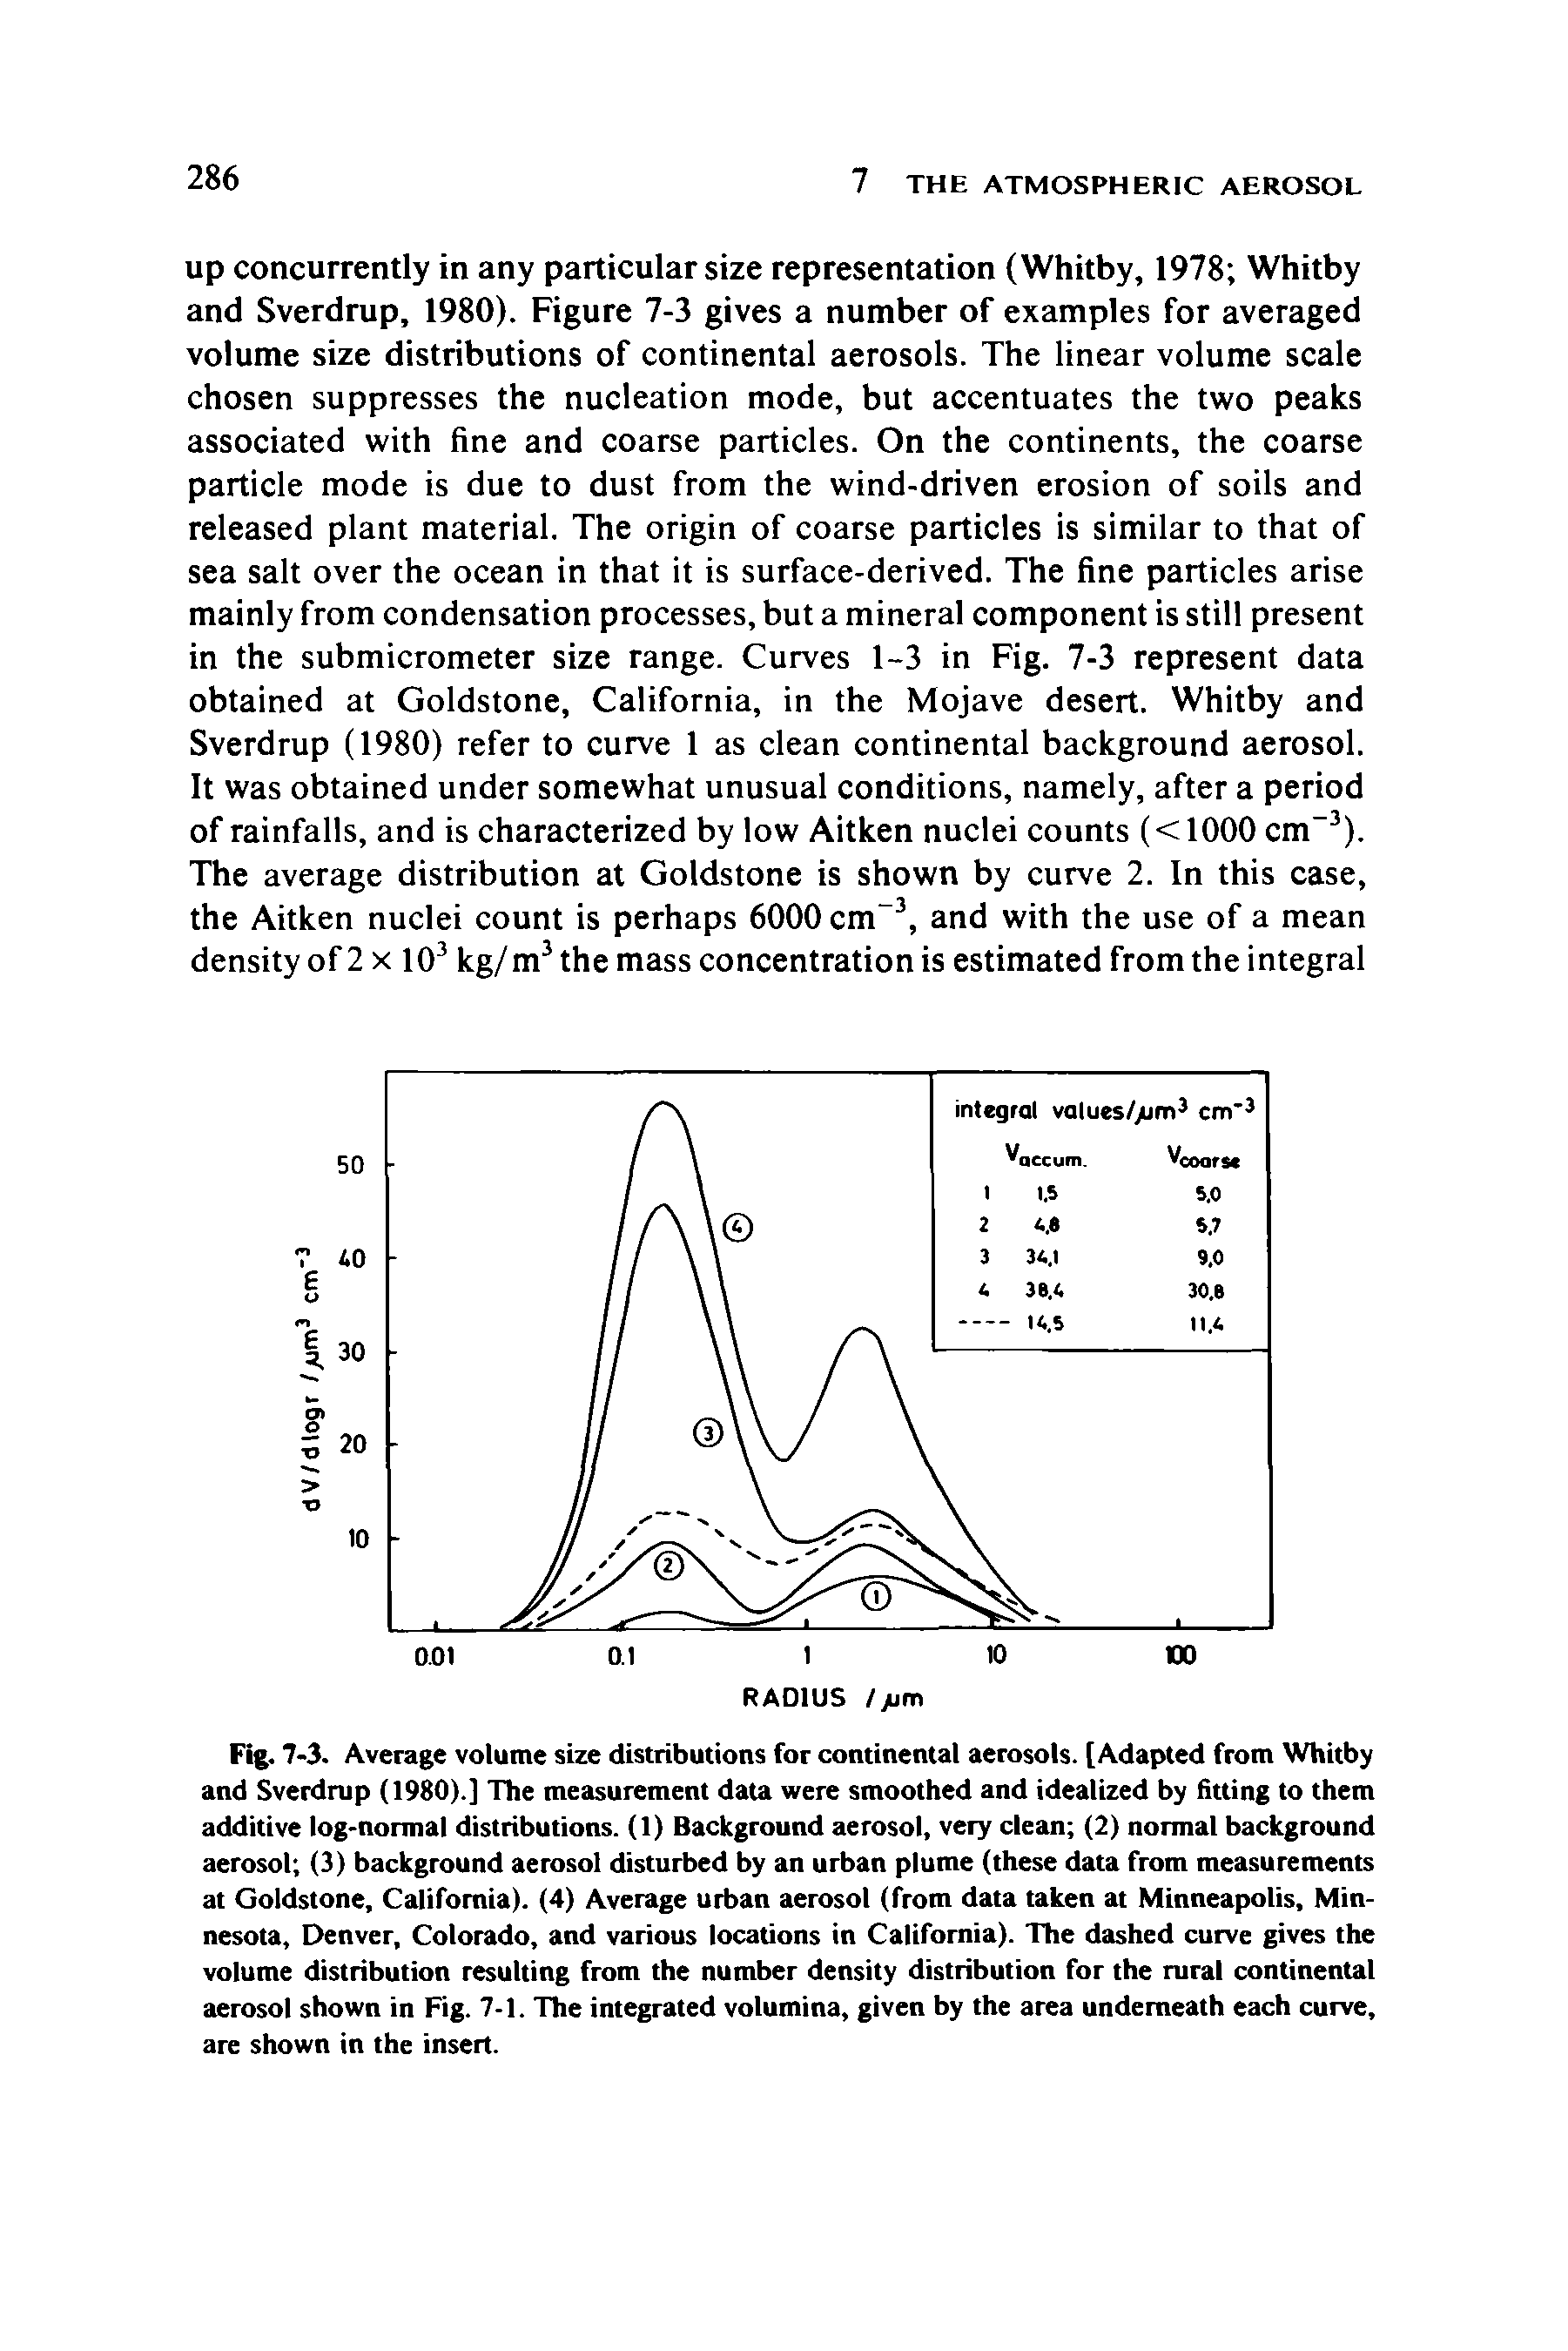 Fig. 7-3. Average volume size distributions for continental aerosols. [Adapted from Whitby and Sverdrup (1980).] The measurement data were smoothed and idealized by fitting to them additive log-normal distributions. (1) Background aerosol, very clean (2) normal background aerosol (3) background aerosol disturbed by an urban plume (these data from measurements at Goldstone, California). (4) Average urban aerosol (from data taken at Minneapolis, Minnesota, Denver, Colorado, and various locations in California). The dashed curve gives the volume distribution resulting from the number density distribution for the rural continental aerosol shown in Fig. 7-1. The integrated volumina, given by the area underneath each curve, are shown in the insert.